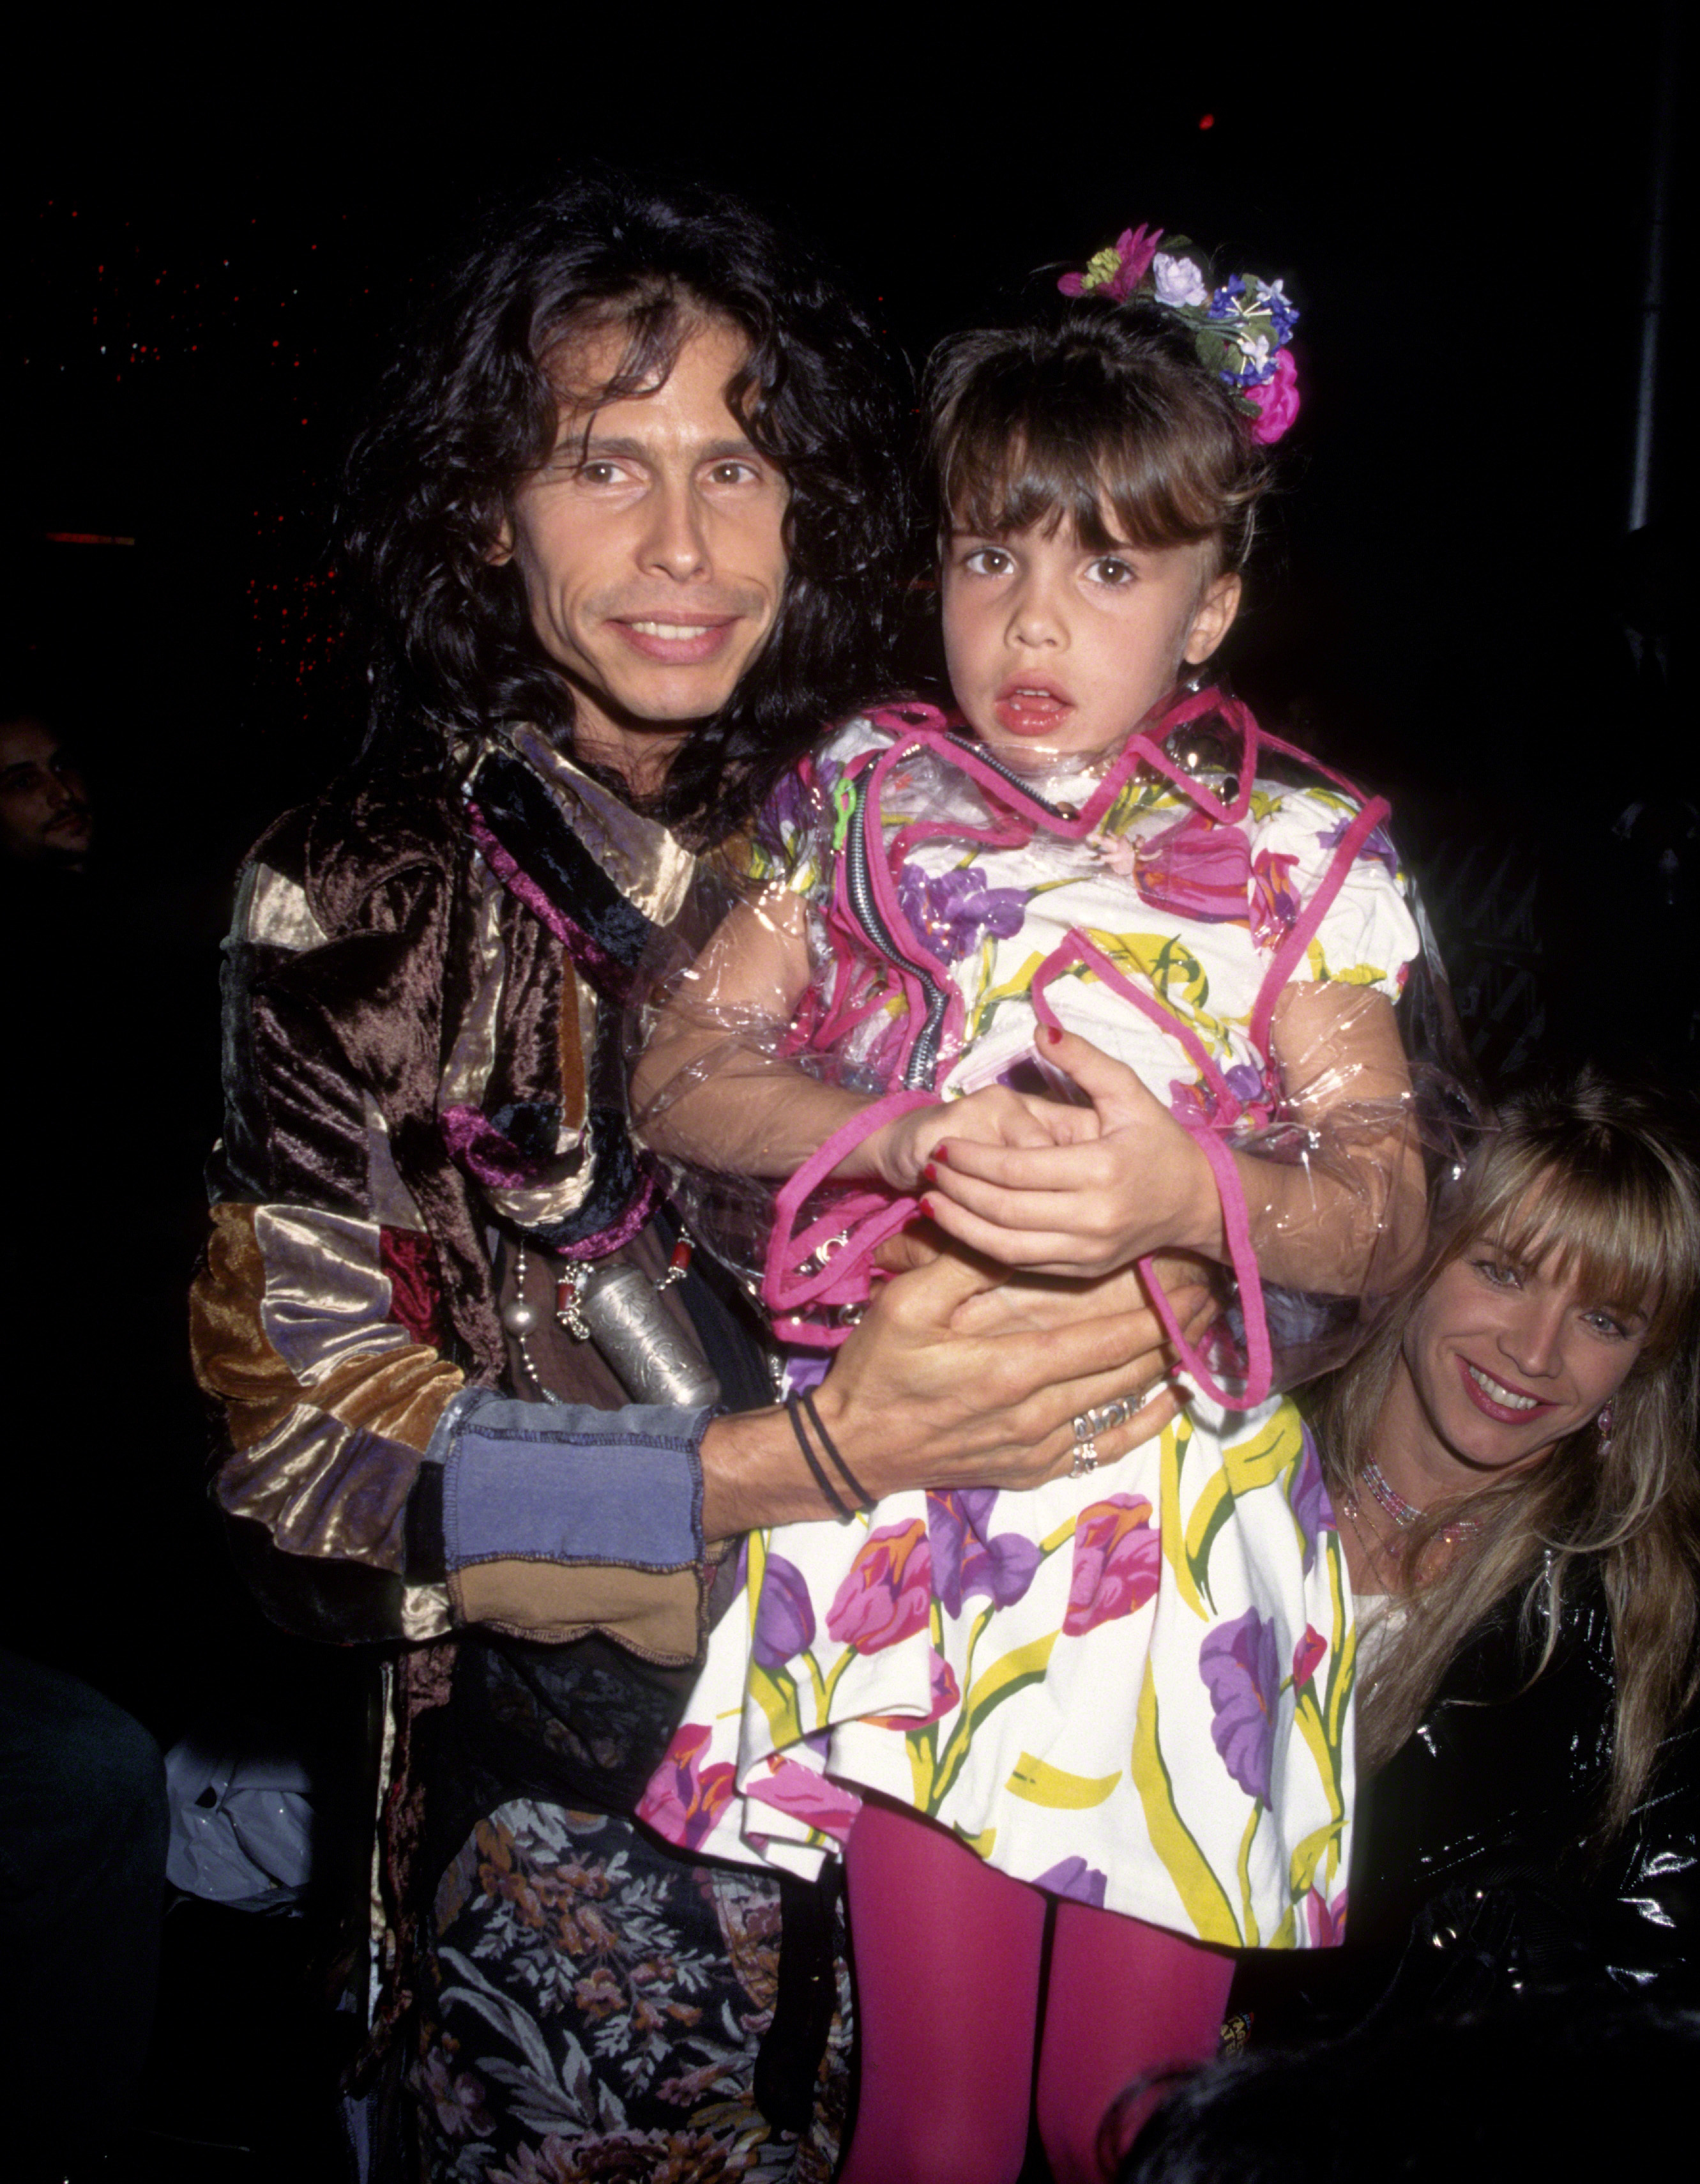 <p>Steven Tyler, then-wife Teresa Barrick and daughter Chelsea Tyler attended one of designer Betsey Johnson's fashion shows in New York City in 1994 when little Chelsea was about 5 years old.</p>